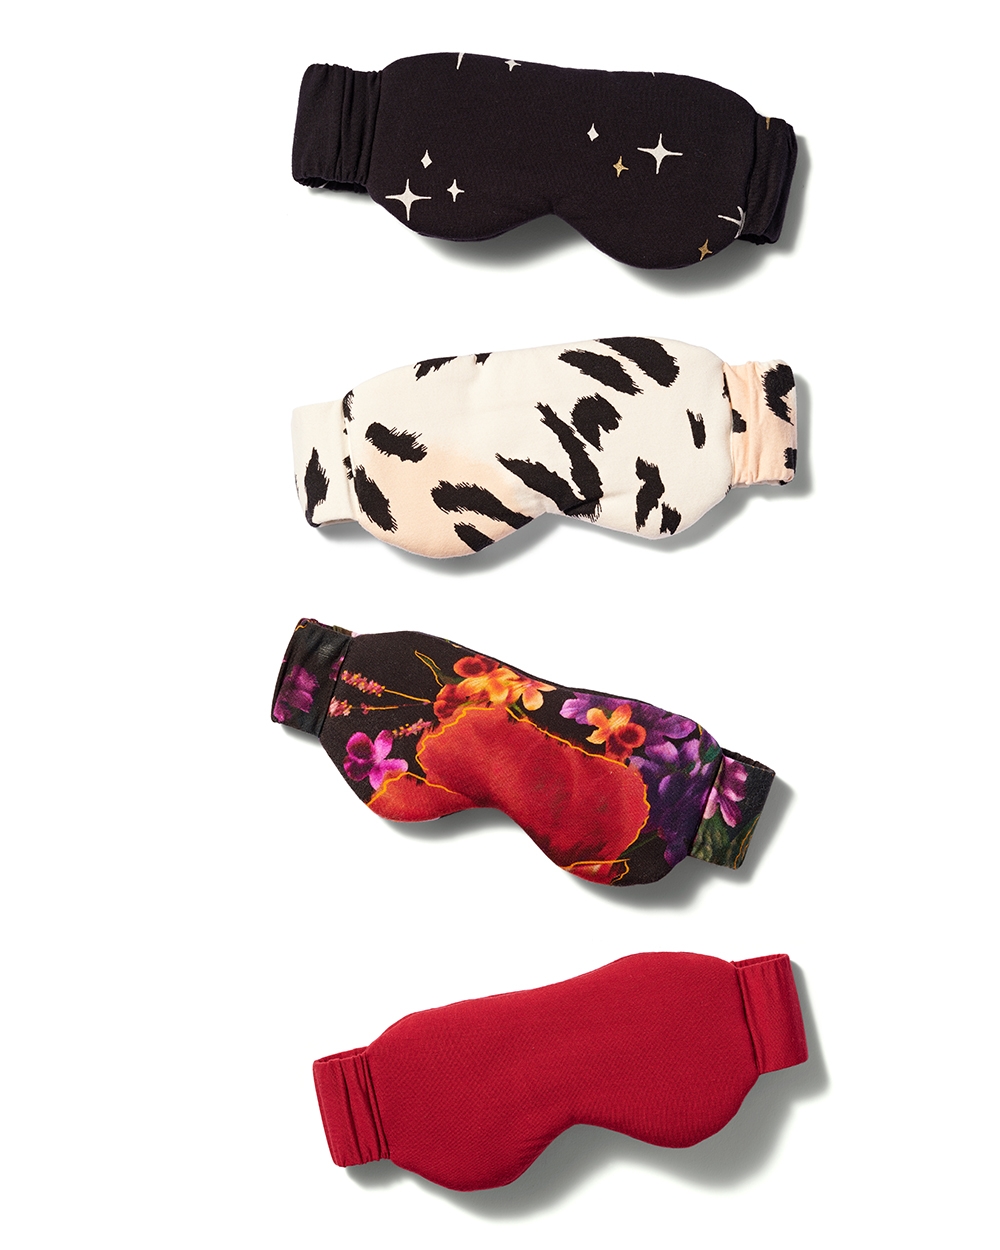 Soma<sup class=st-superscript>®</sup> laydown of black star print, white animal print, black floral print, and solid red eye masks.